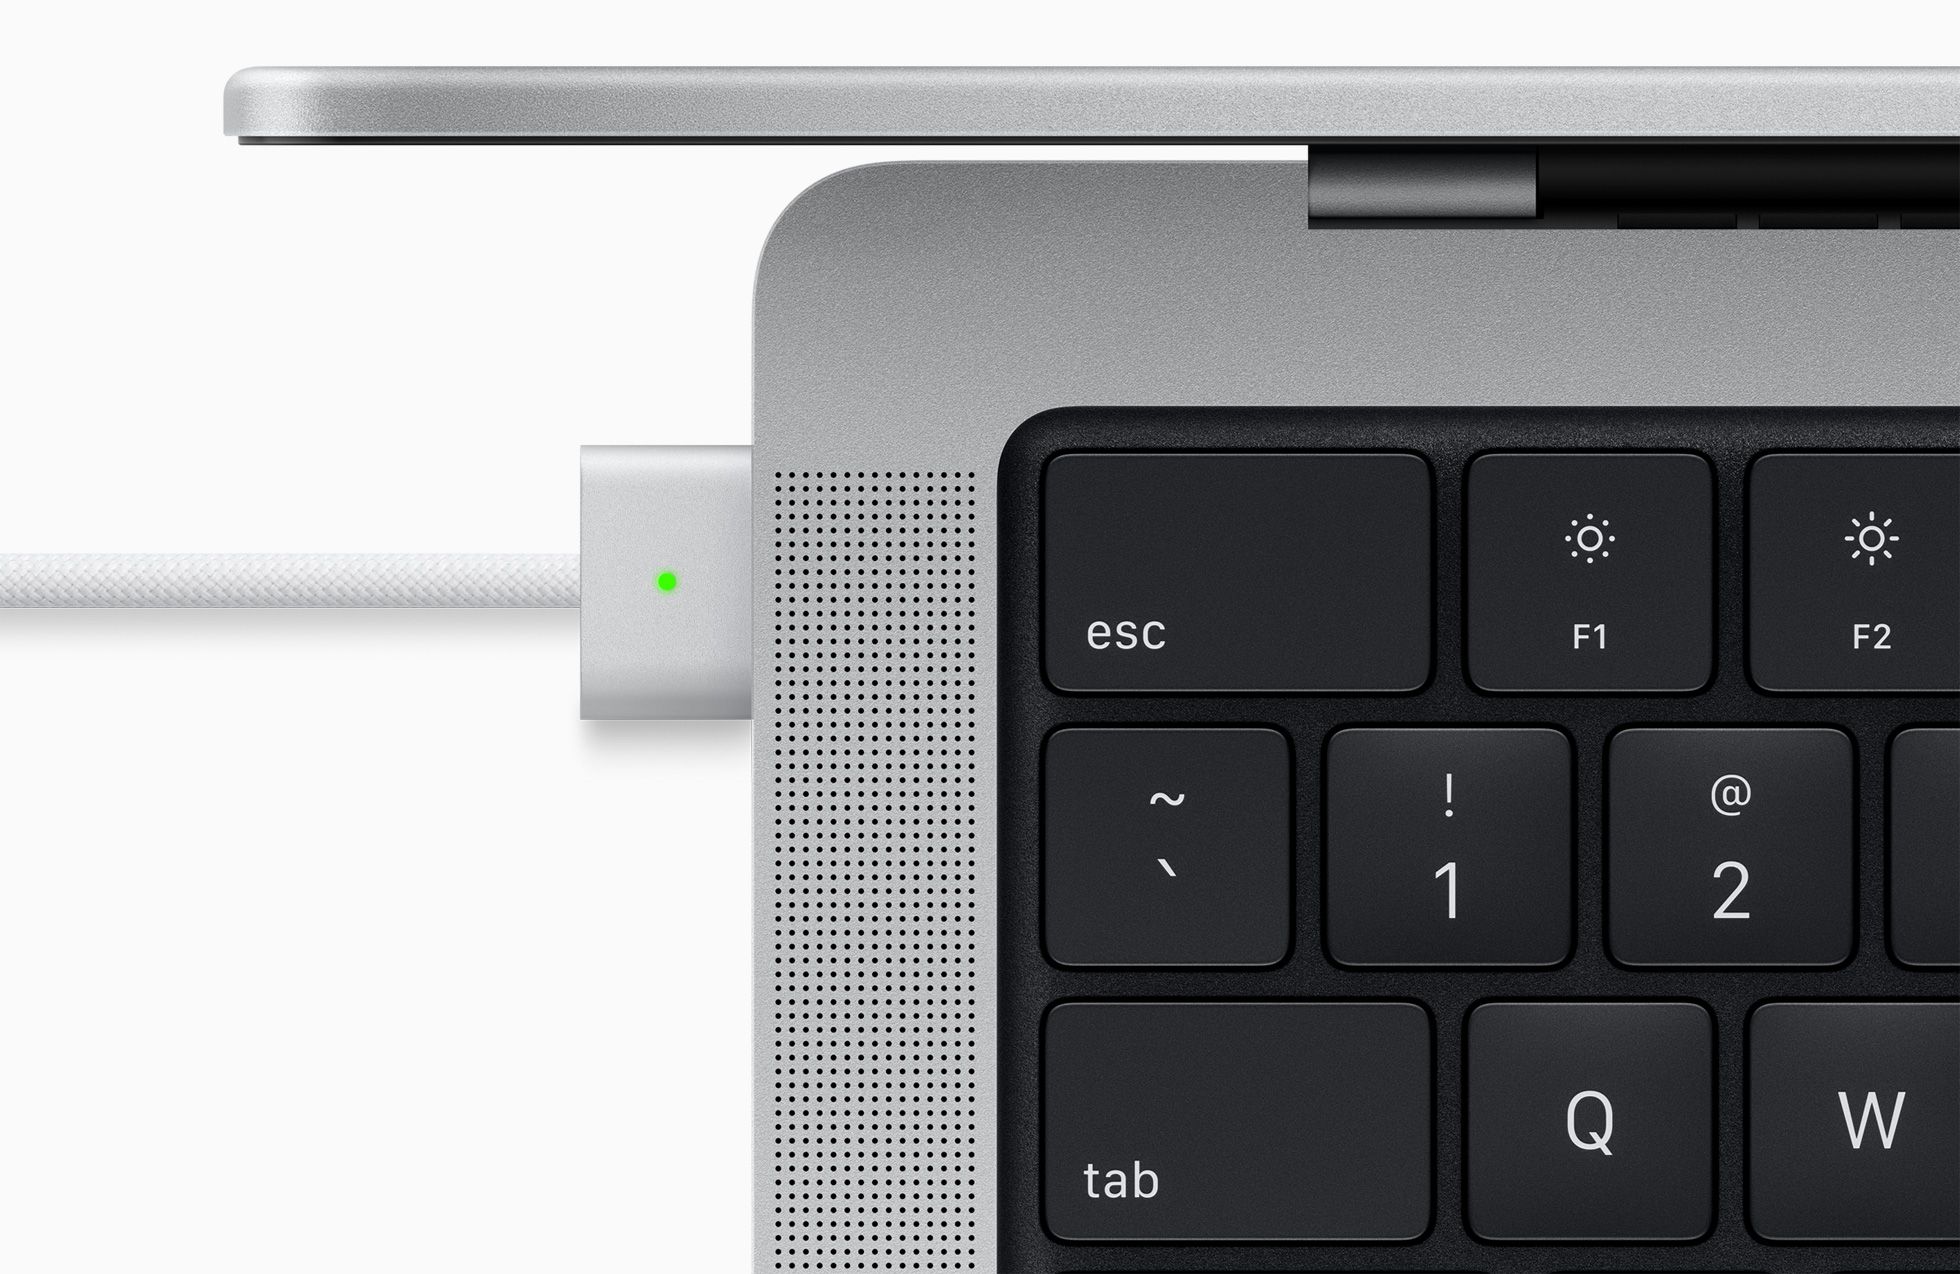 Framework mangfoldighed Knurre 14-inch MacBook Pro Can Fast Charge Via Thunderbolt, But Fast Charge  Limited to MagSafe in 16-inch Model - MacRumors